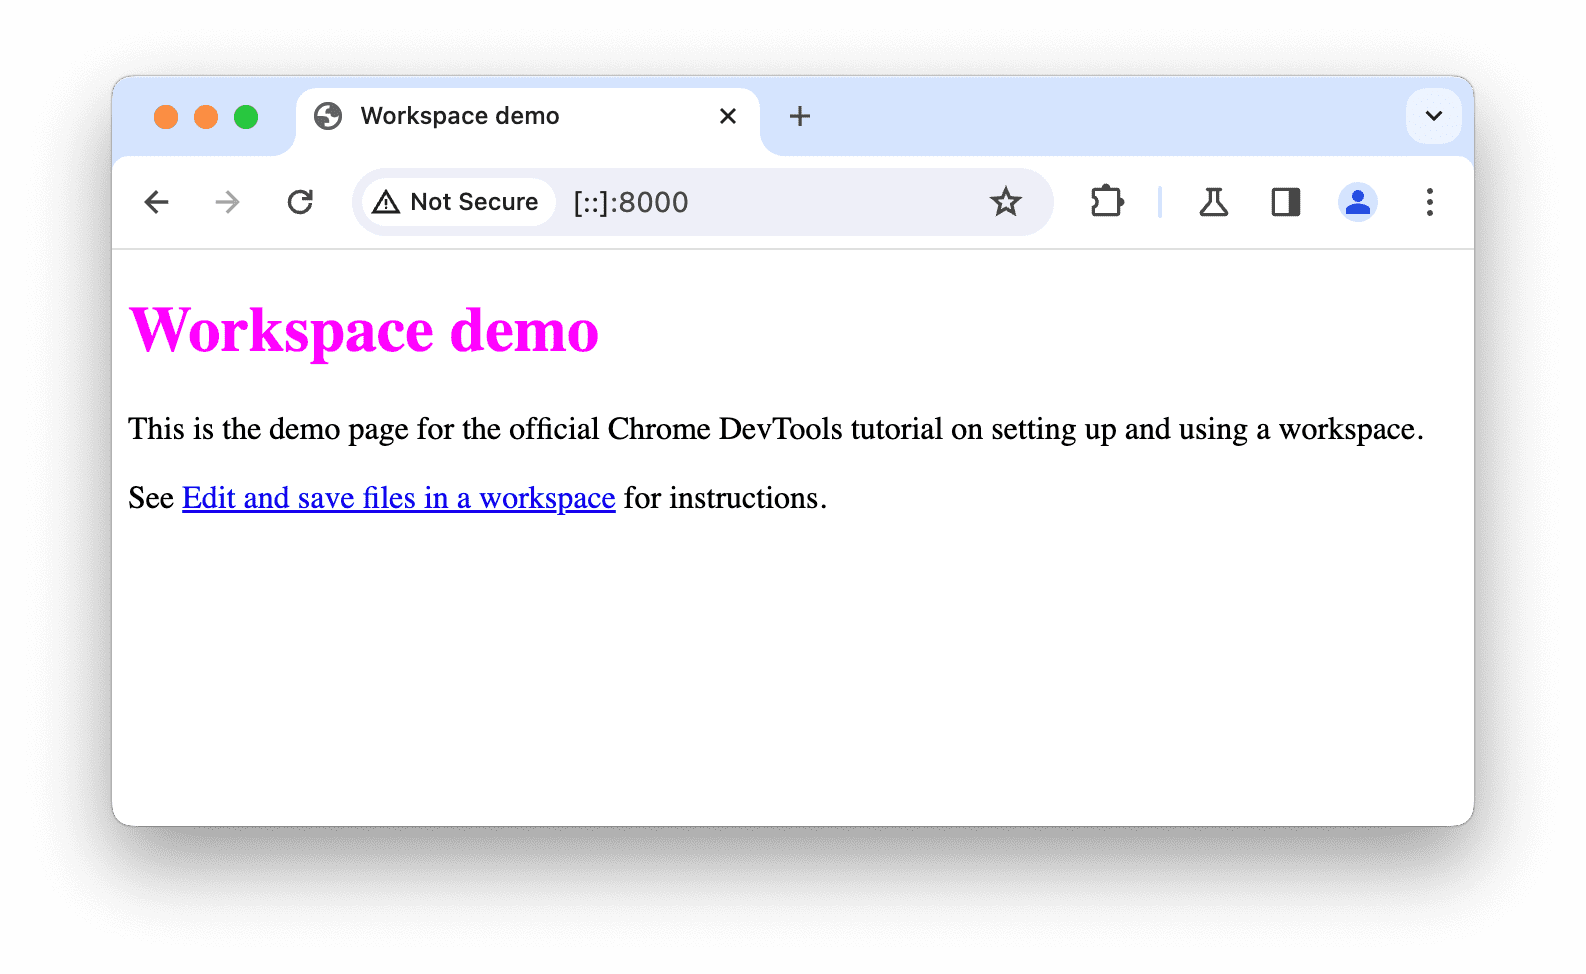 The locally-hosted demo page opened in Chrome.